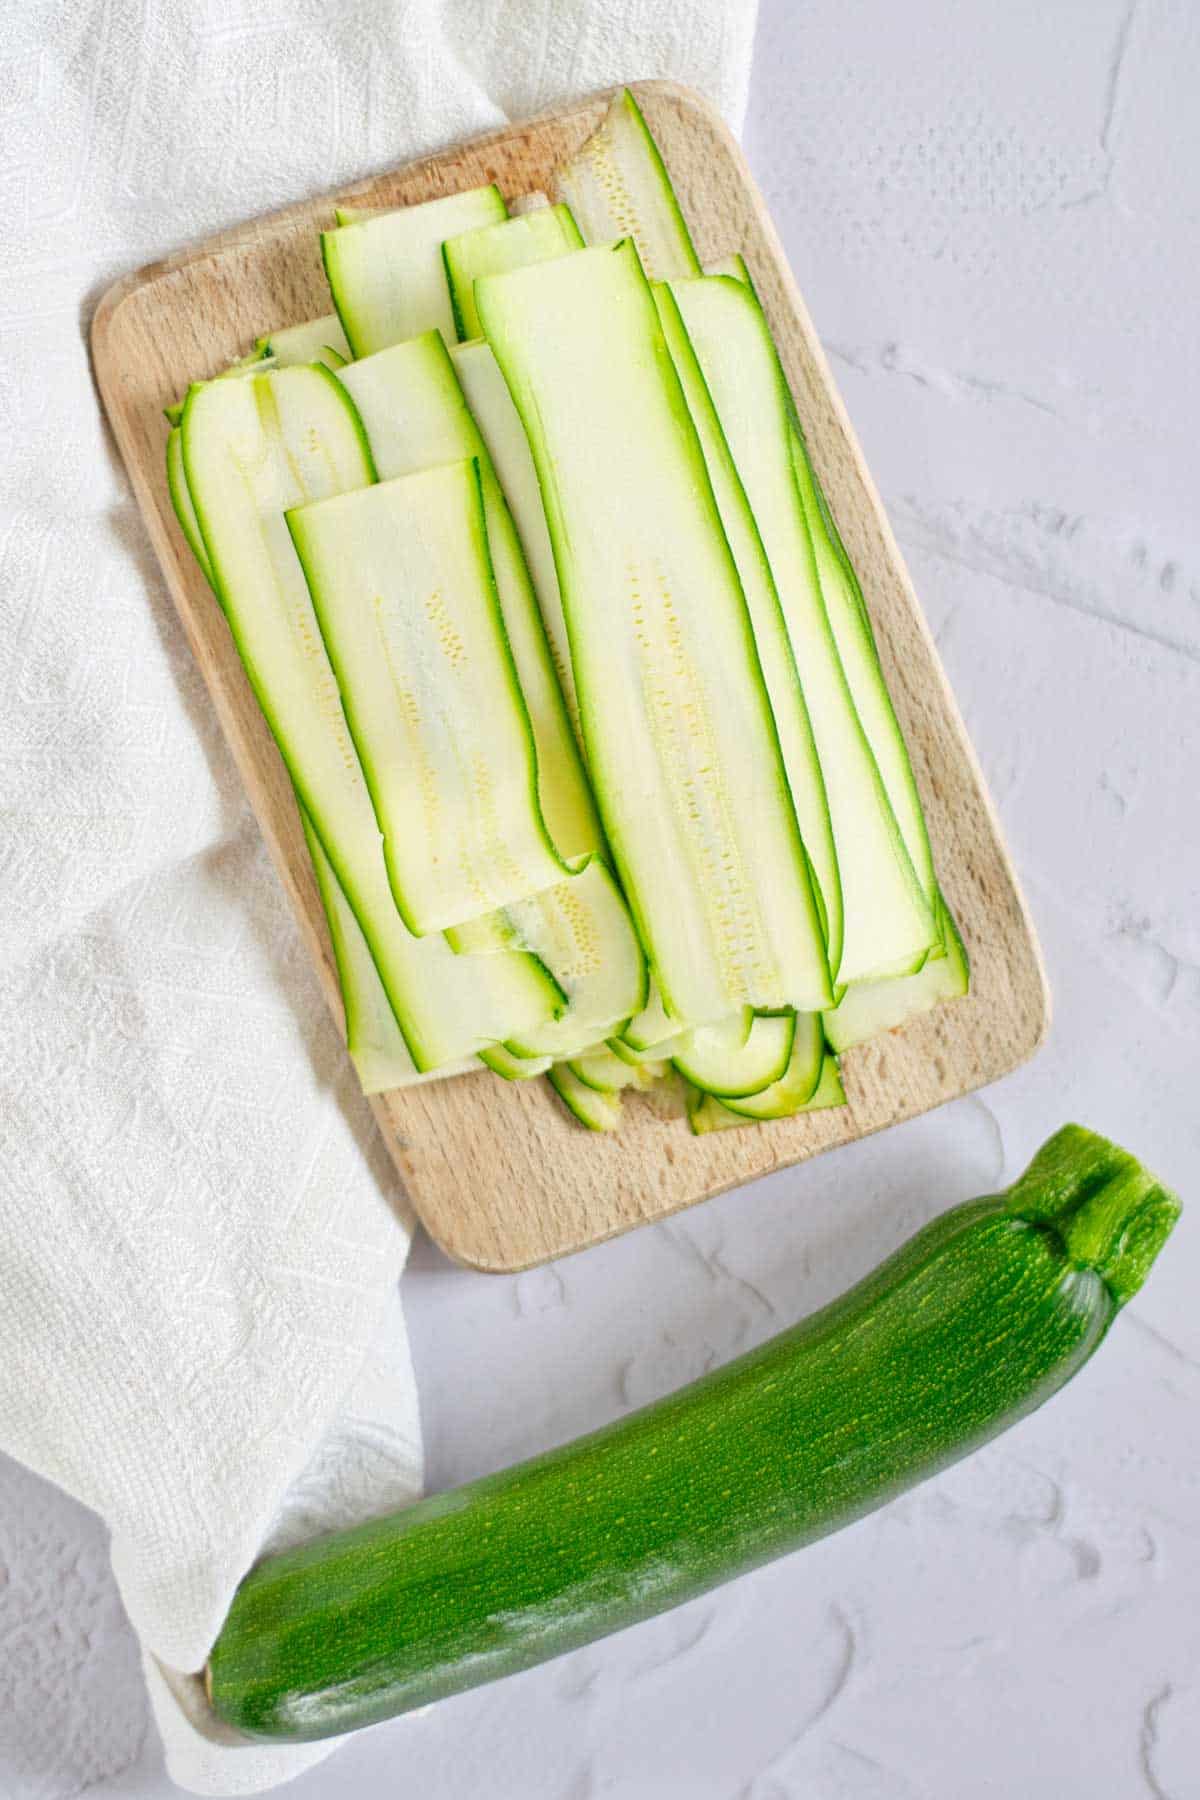 Sliced zucchini arranged on a wooden cutting board next to a whole zucchini.